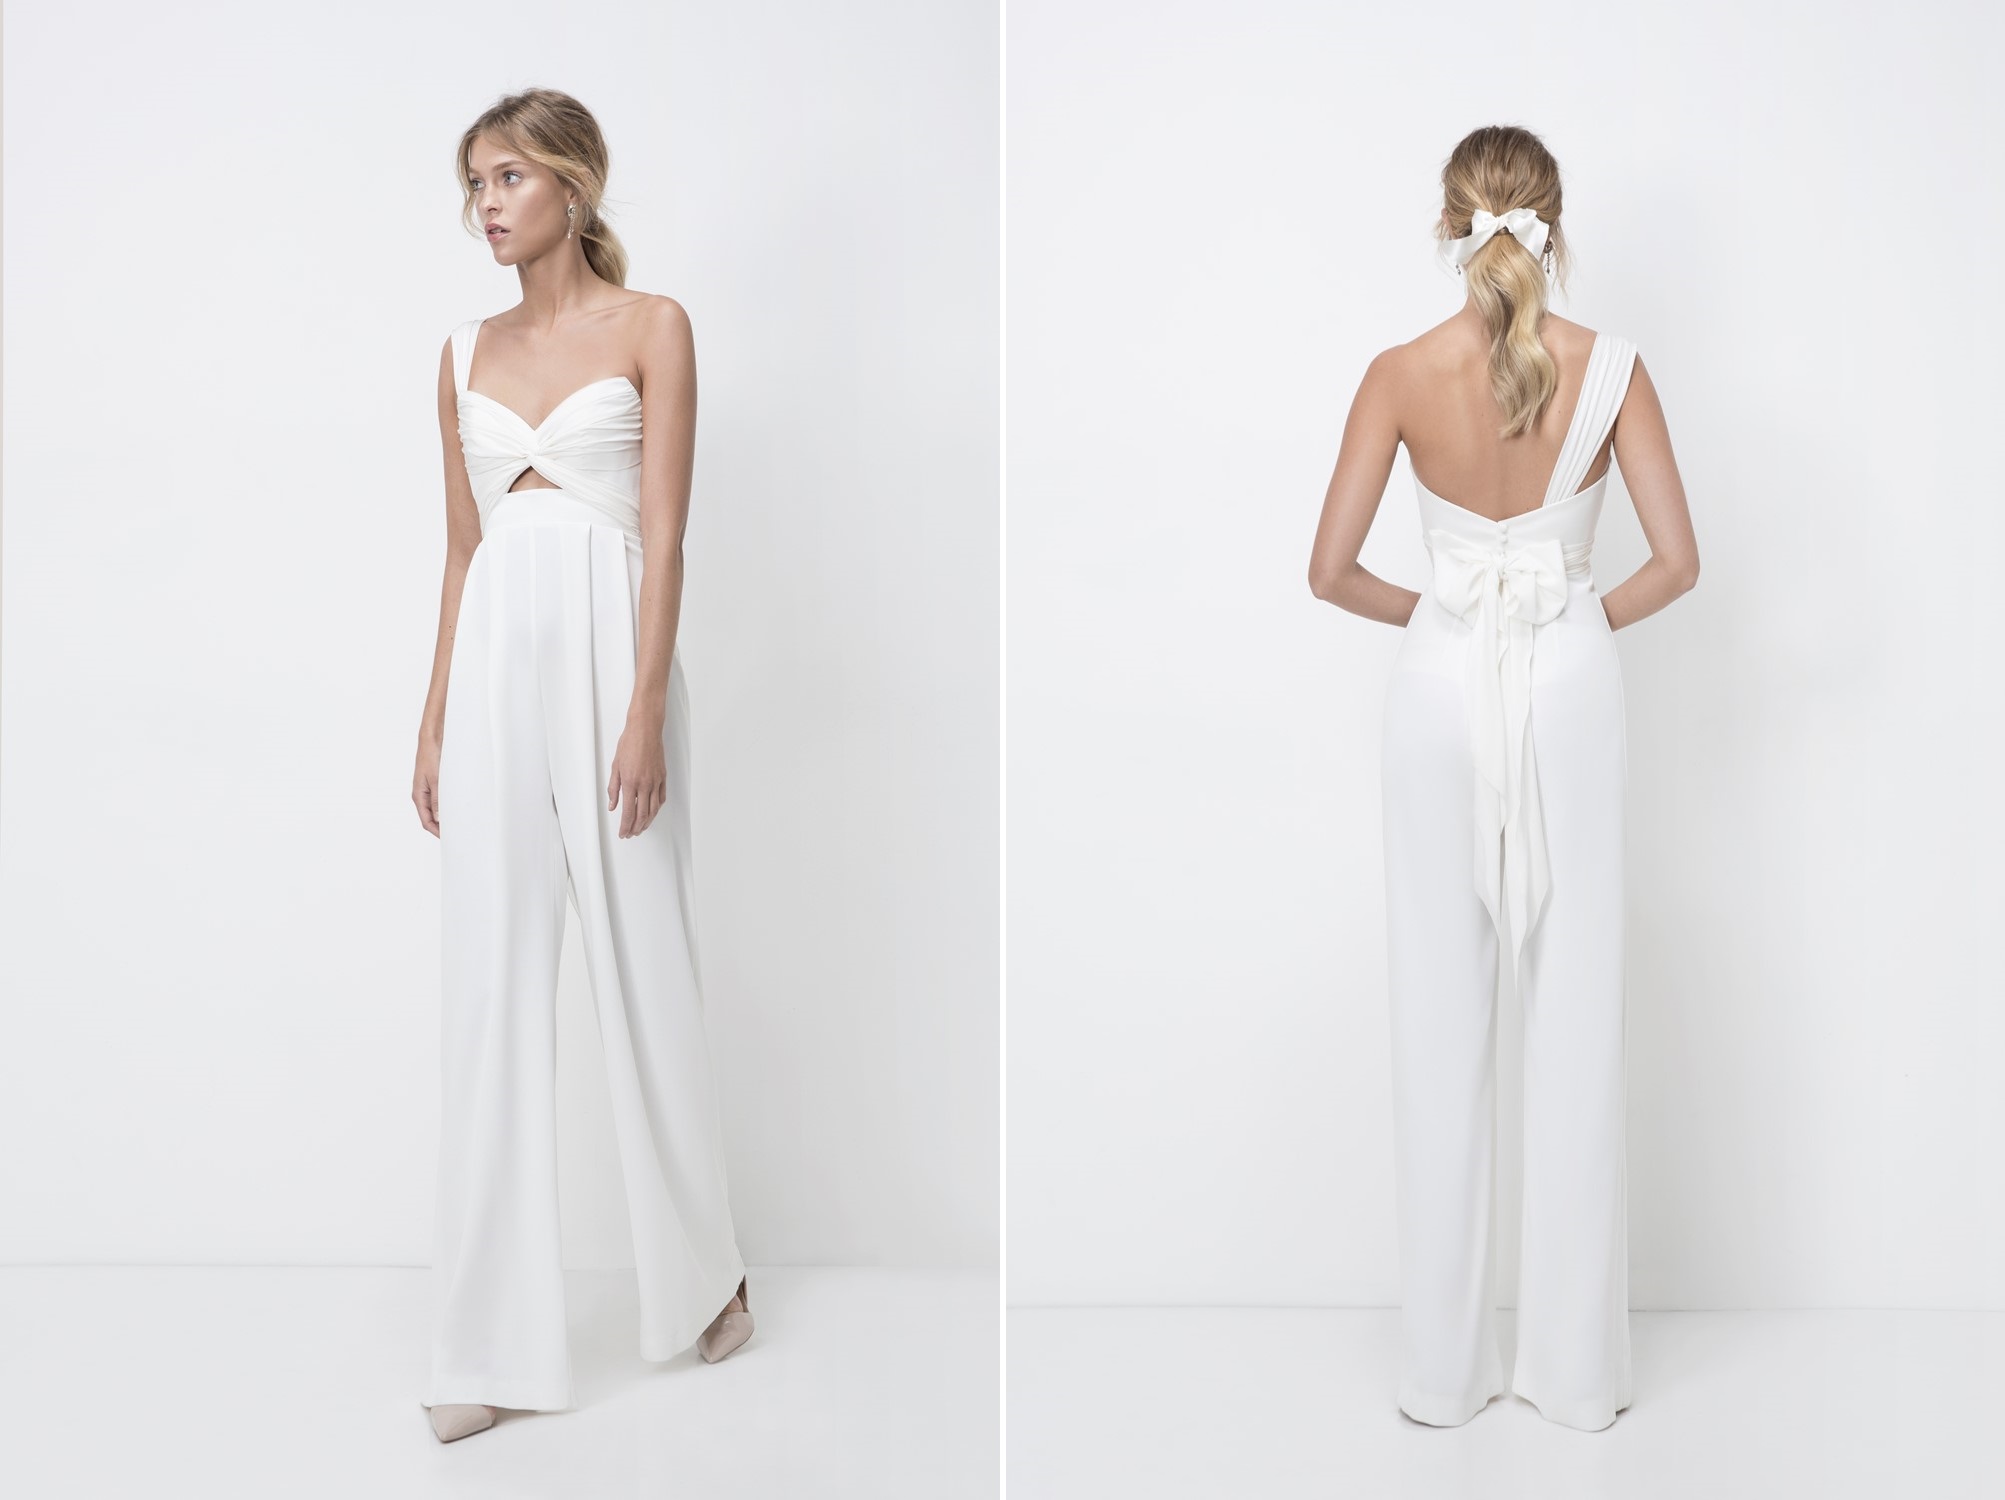 Eve Bridal Trousers from Lihi Hod's 2018 Bridal Collection